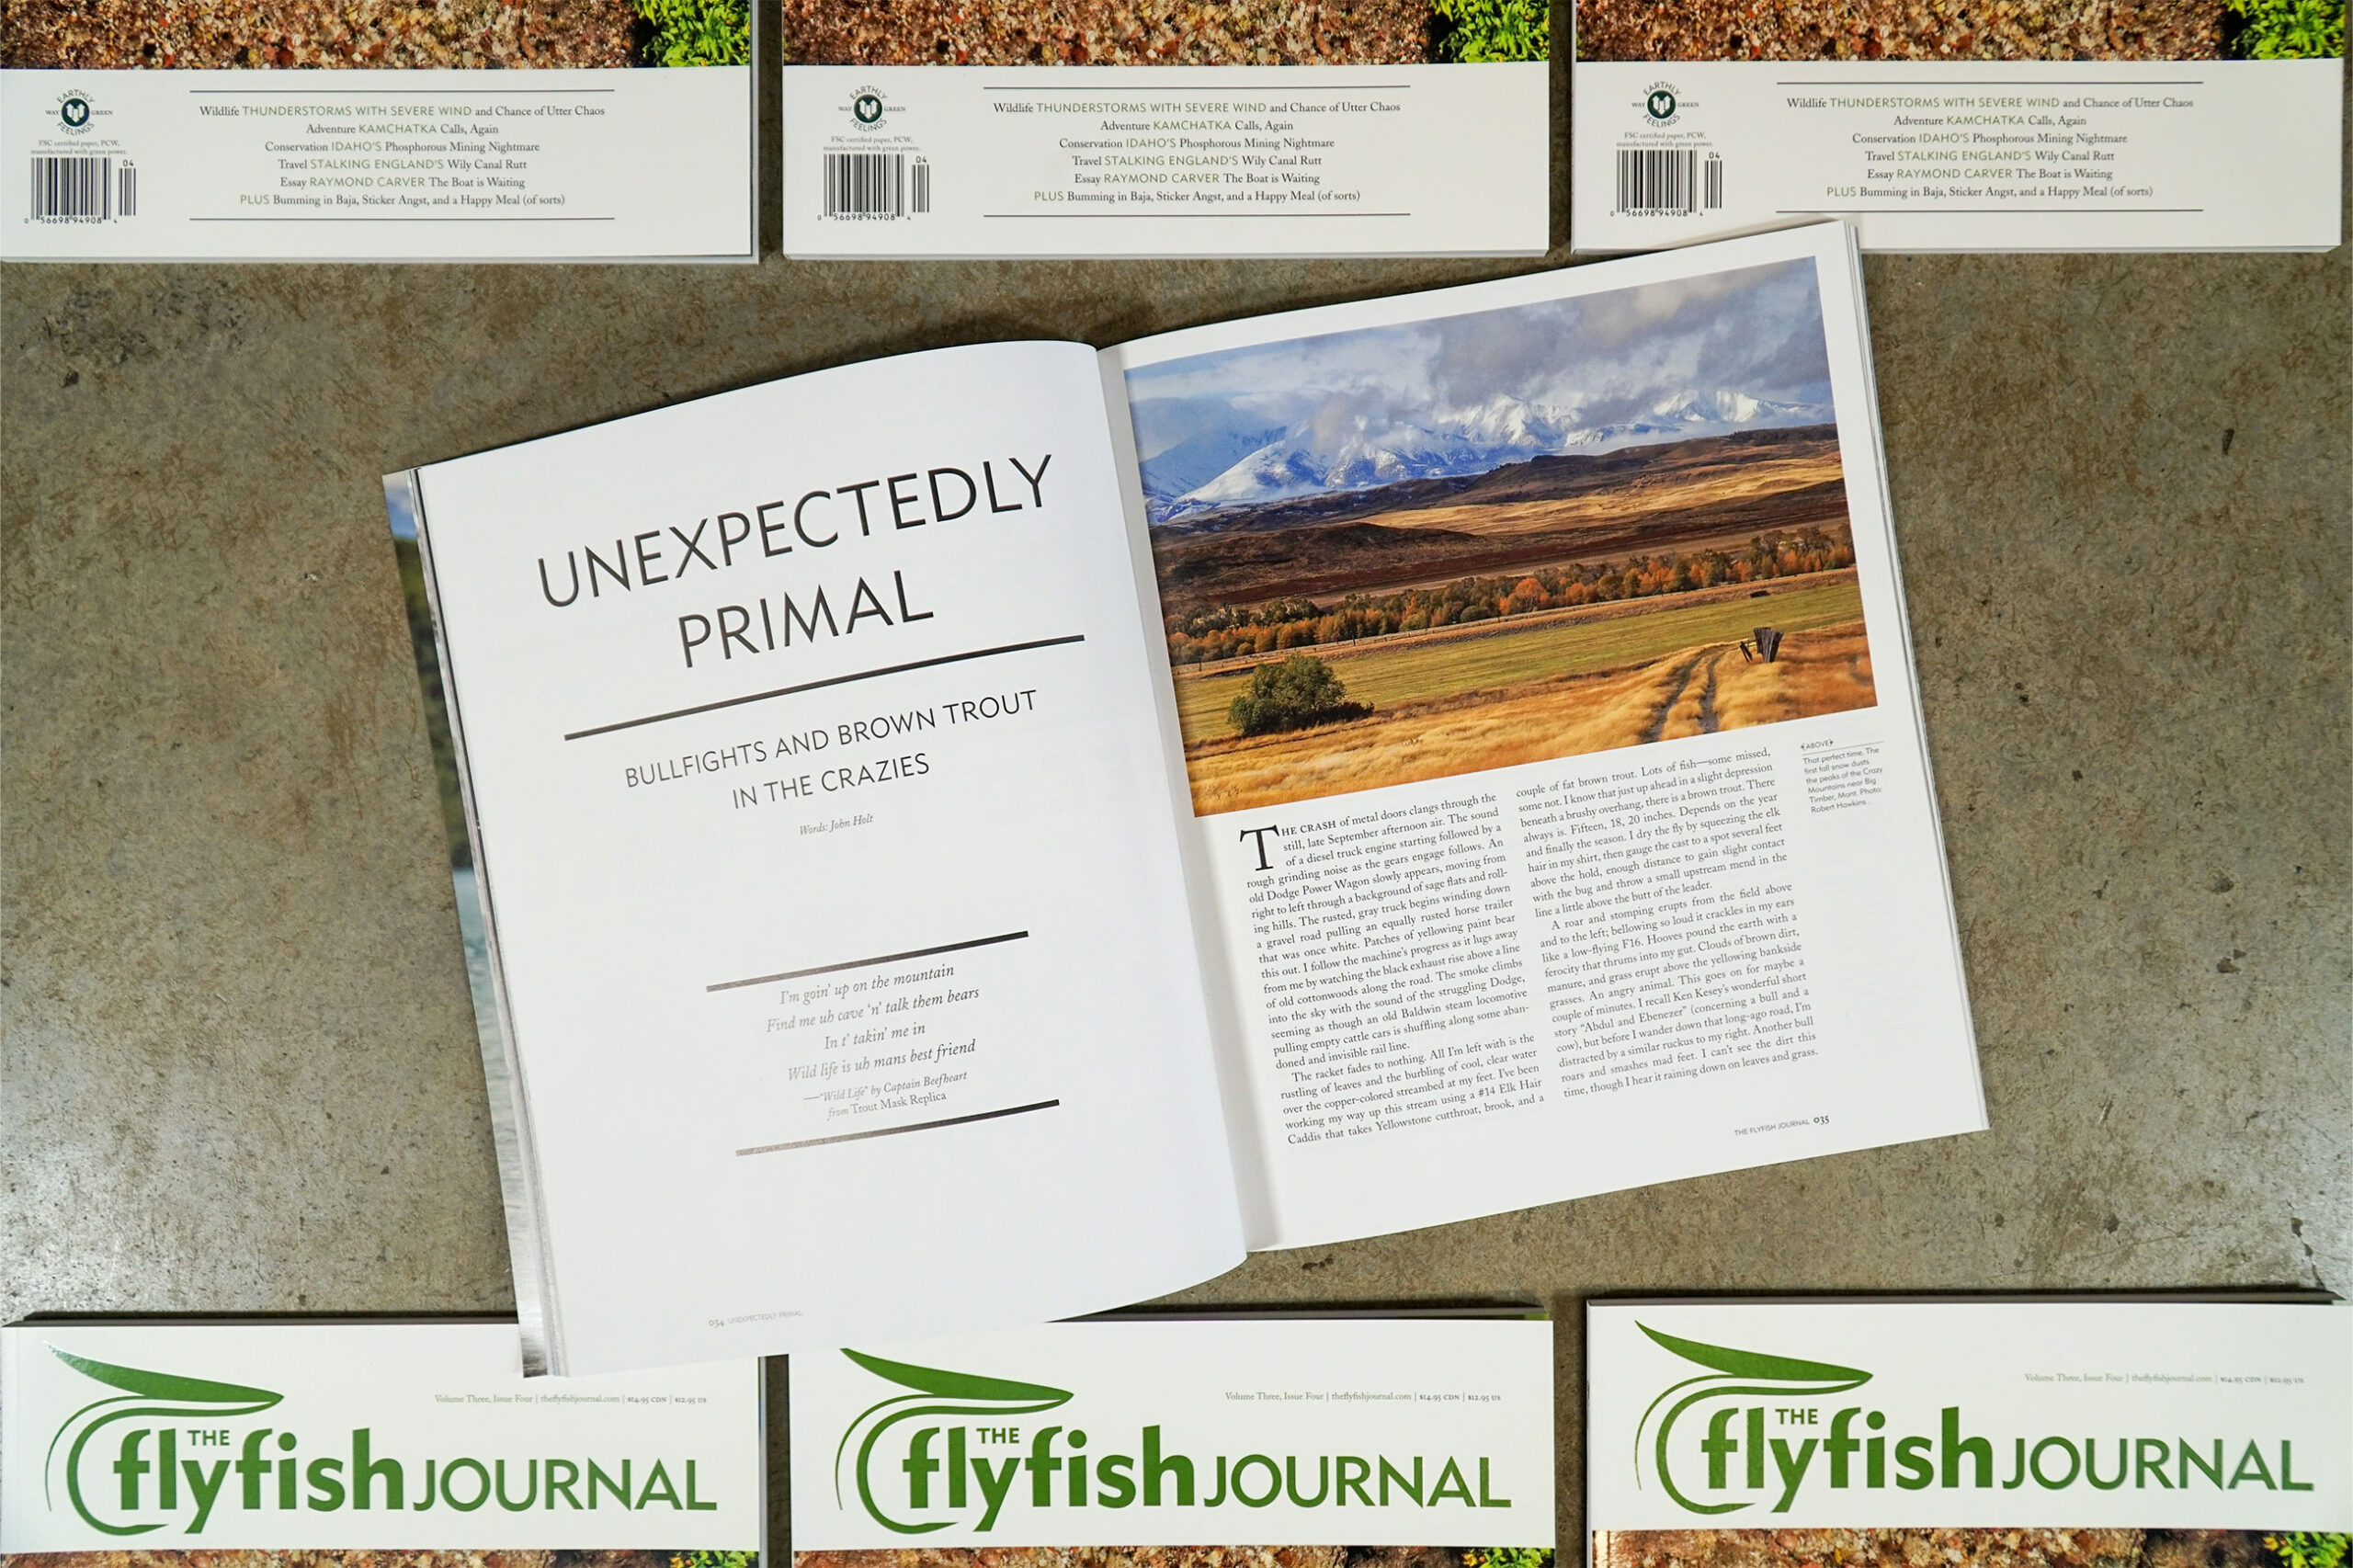 The Flyfish Journal Volume 3 Issue 4 Feature Unexpectedly Primal